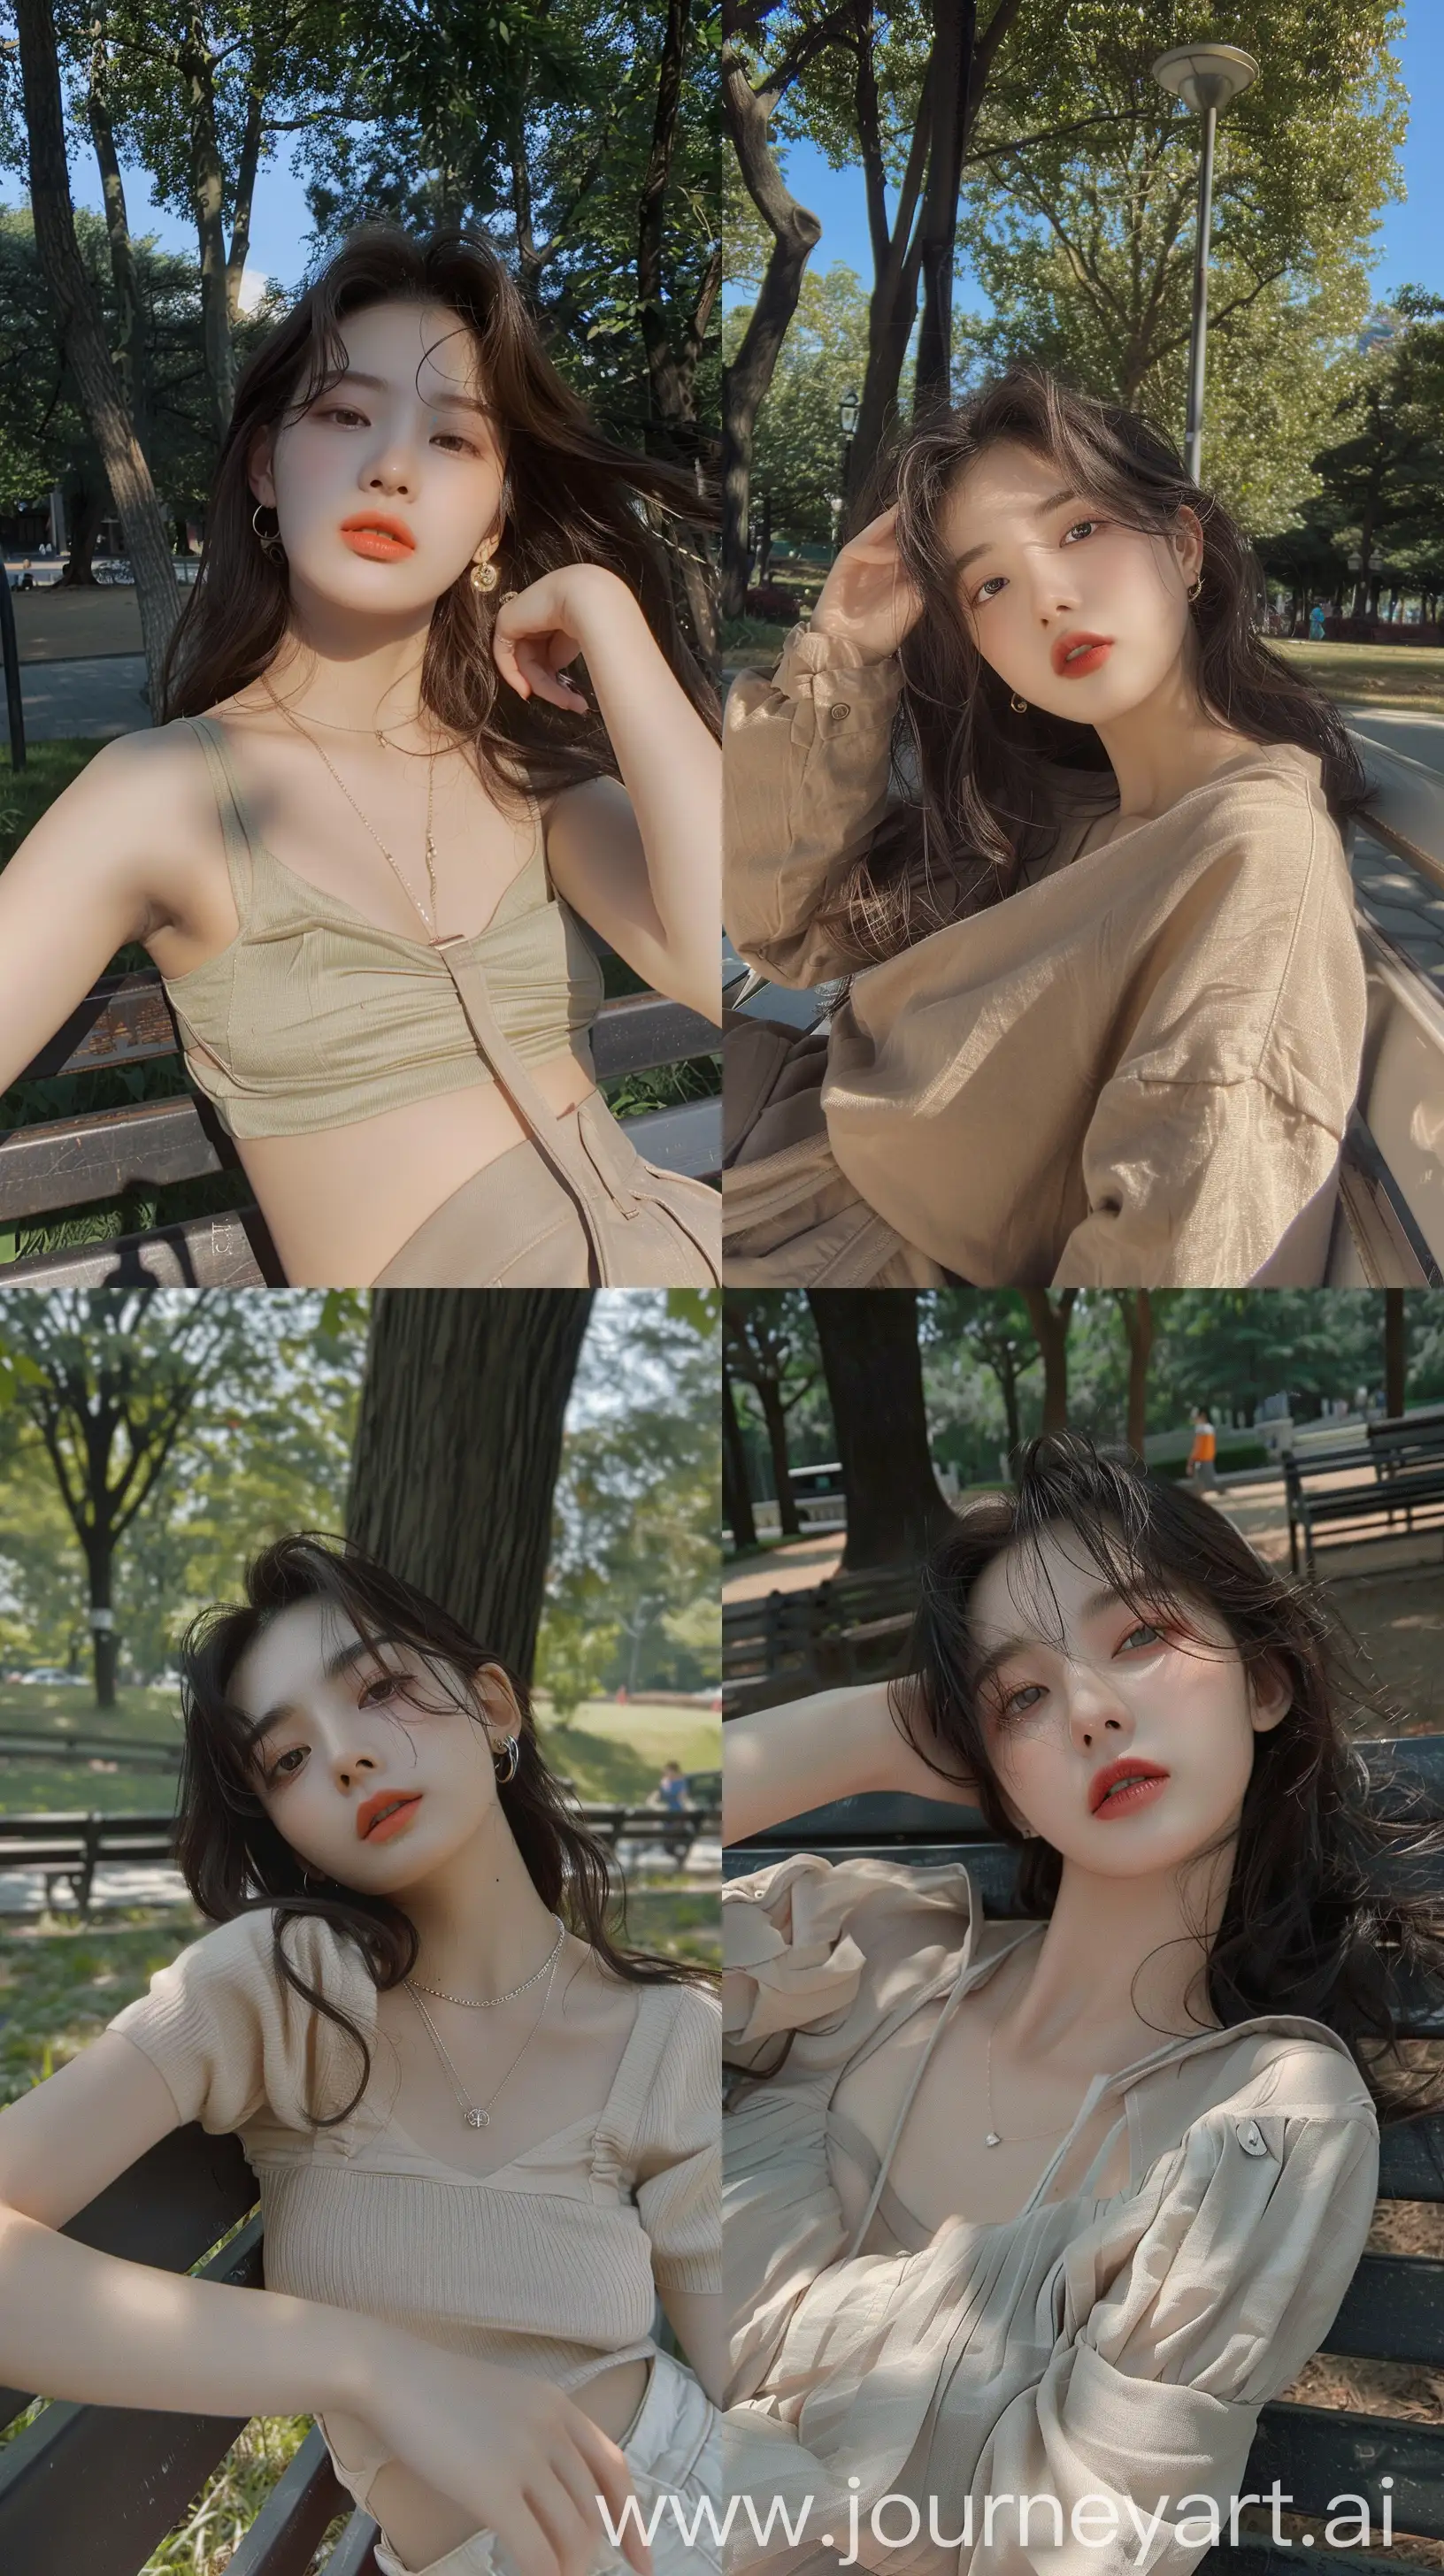 Aesthetic-Selfie-Wonyoung-Posing-in-Cute-Simple-Clothes-on-a-Park-Bench